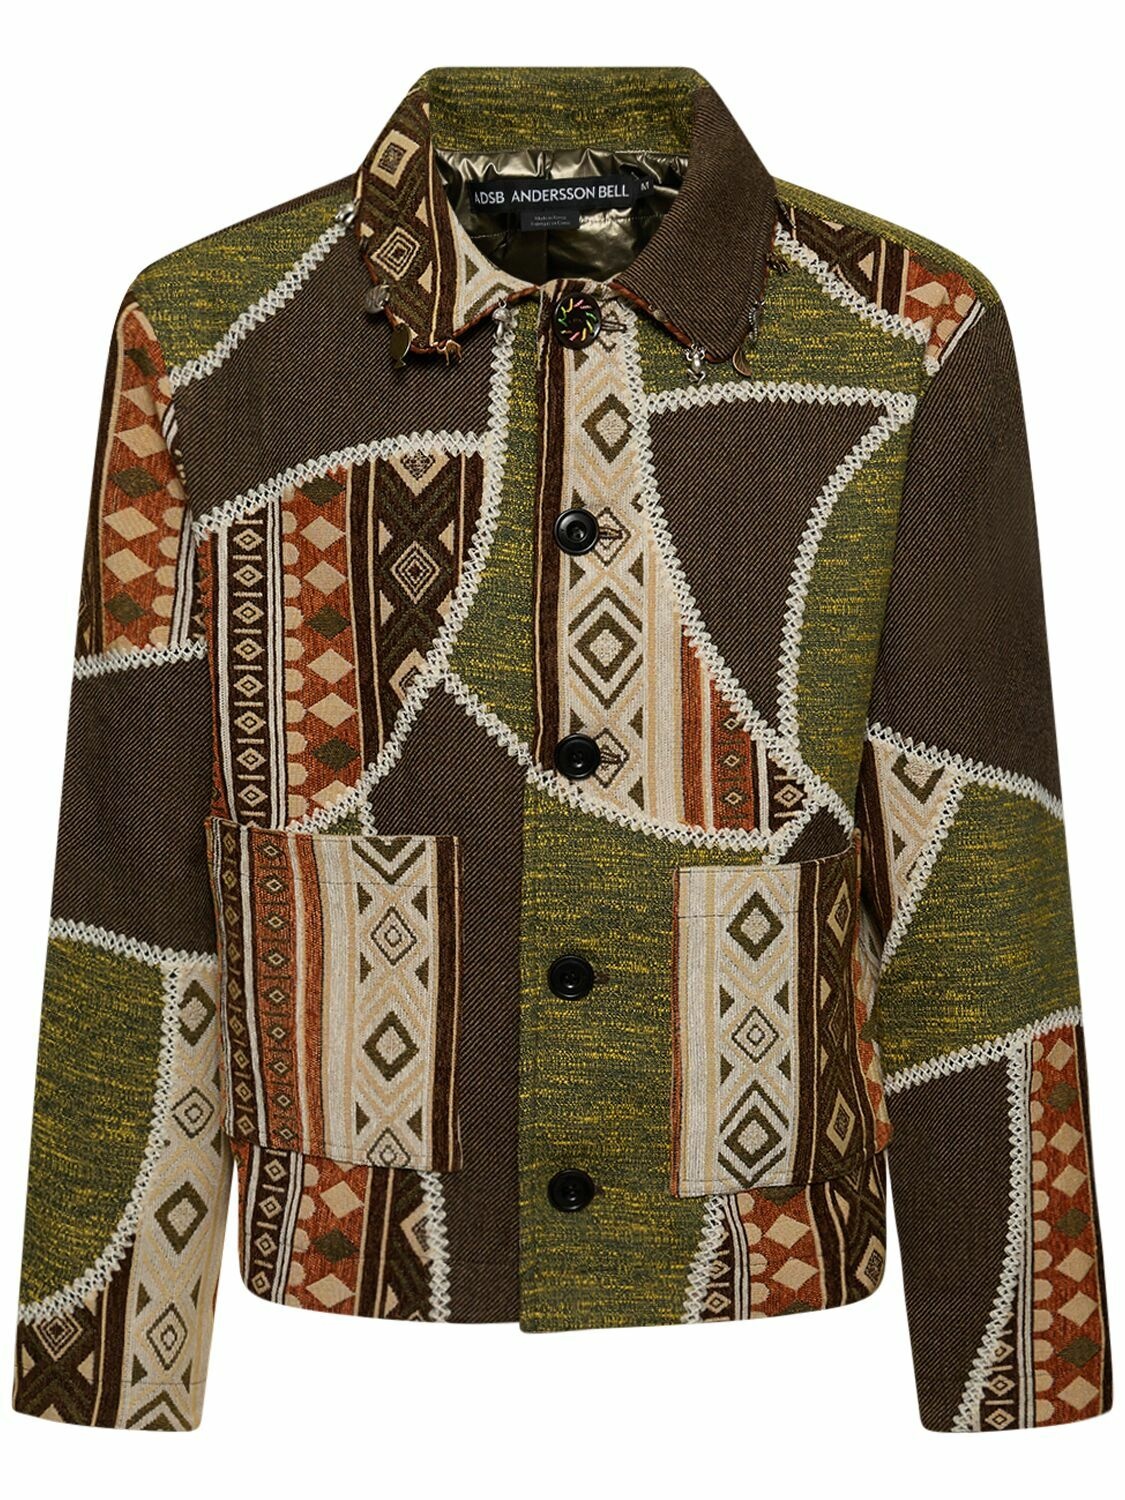 Photo: ANDERSSON BELL Unisex Jacquard Patchwork Jacket